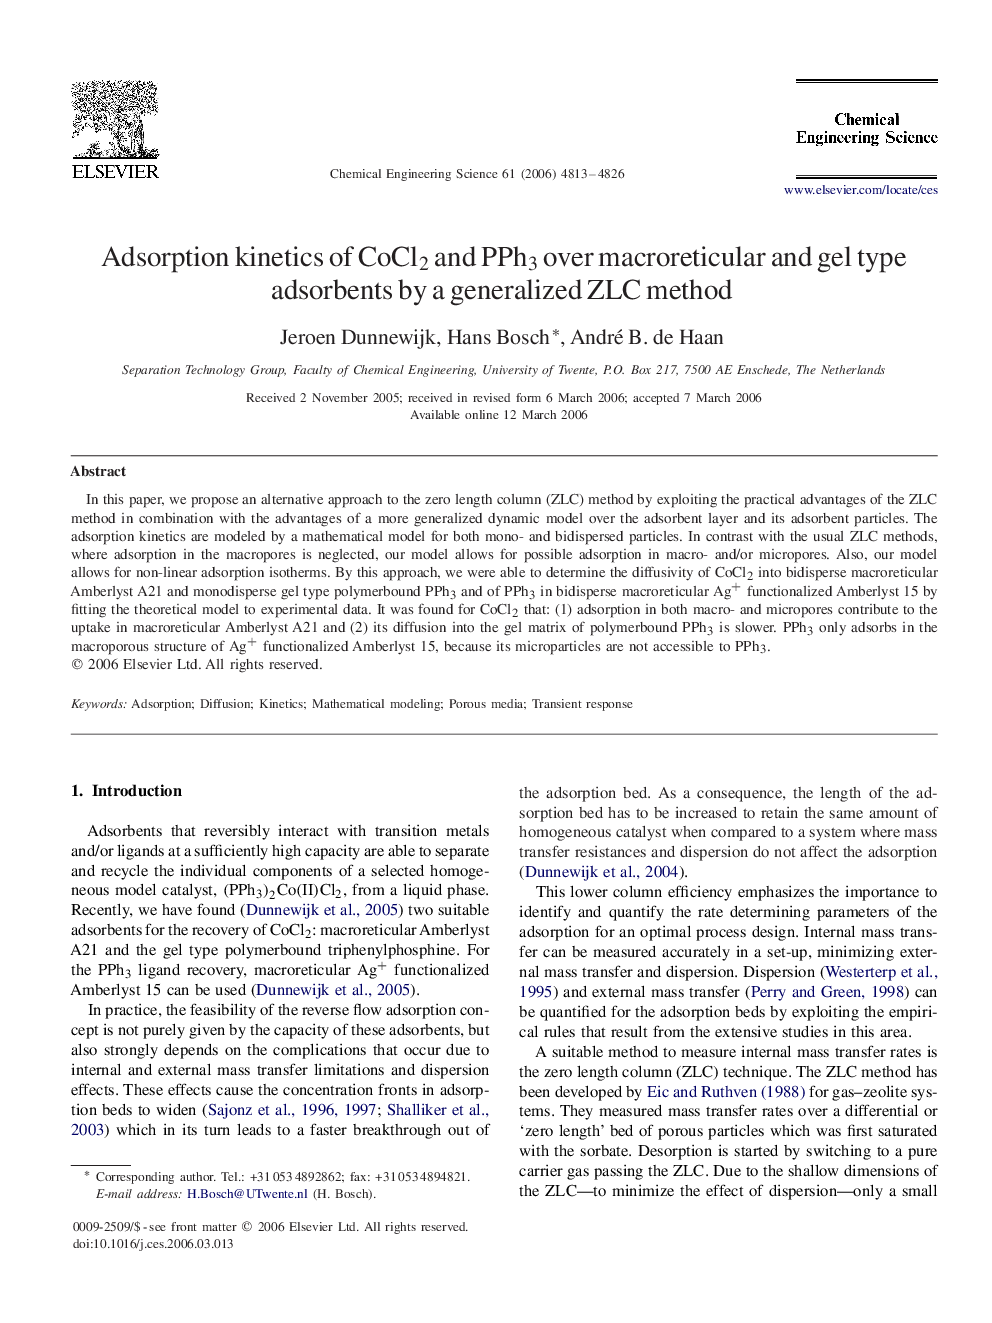 Adsorption kinetics of CoCl2 and PPh3 over macroreticular and gel type adsorbents by a generalized ZLC method